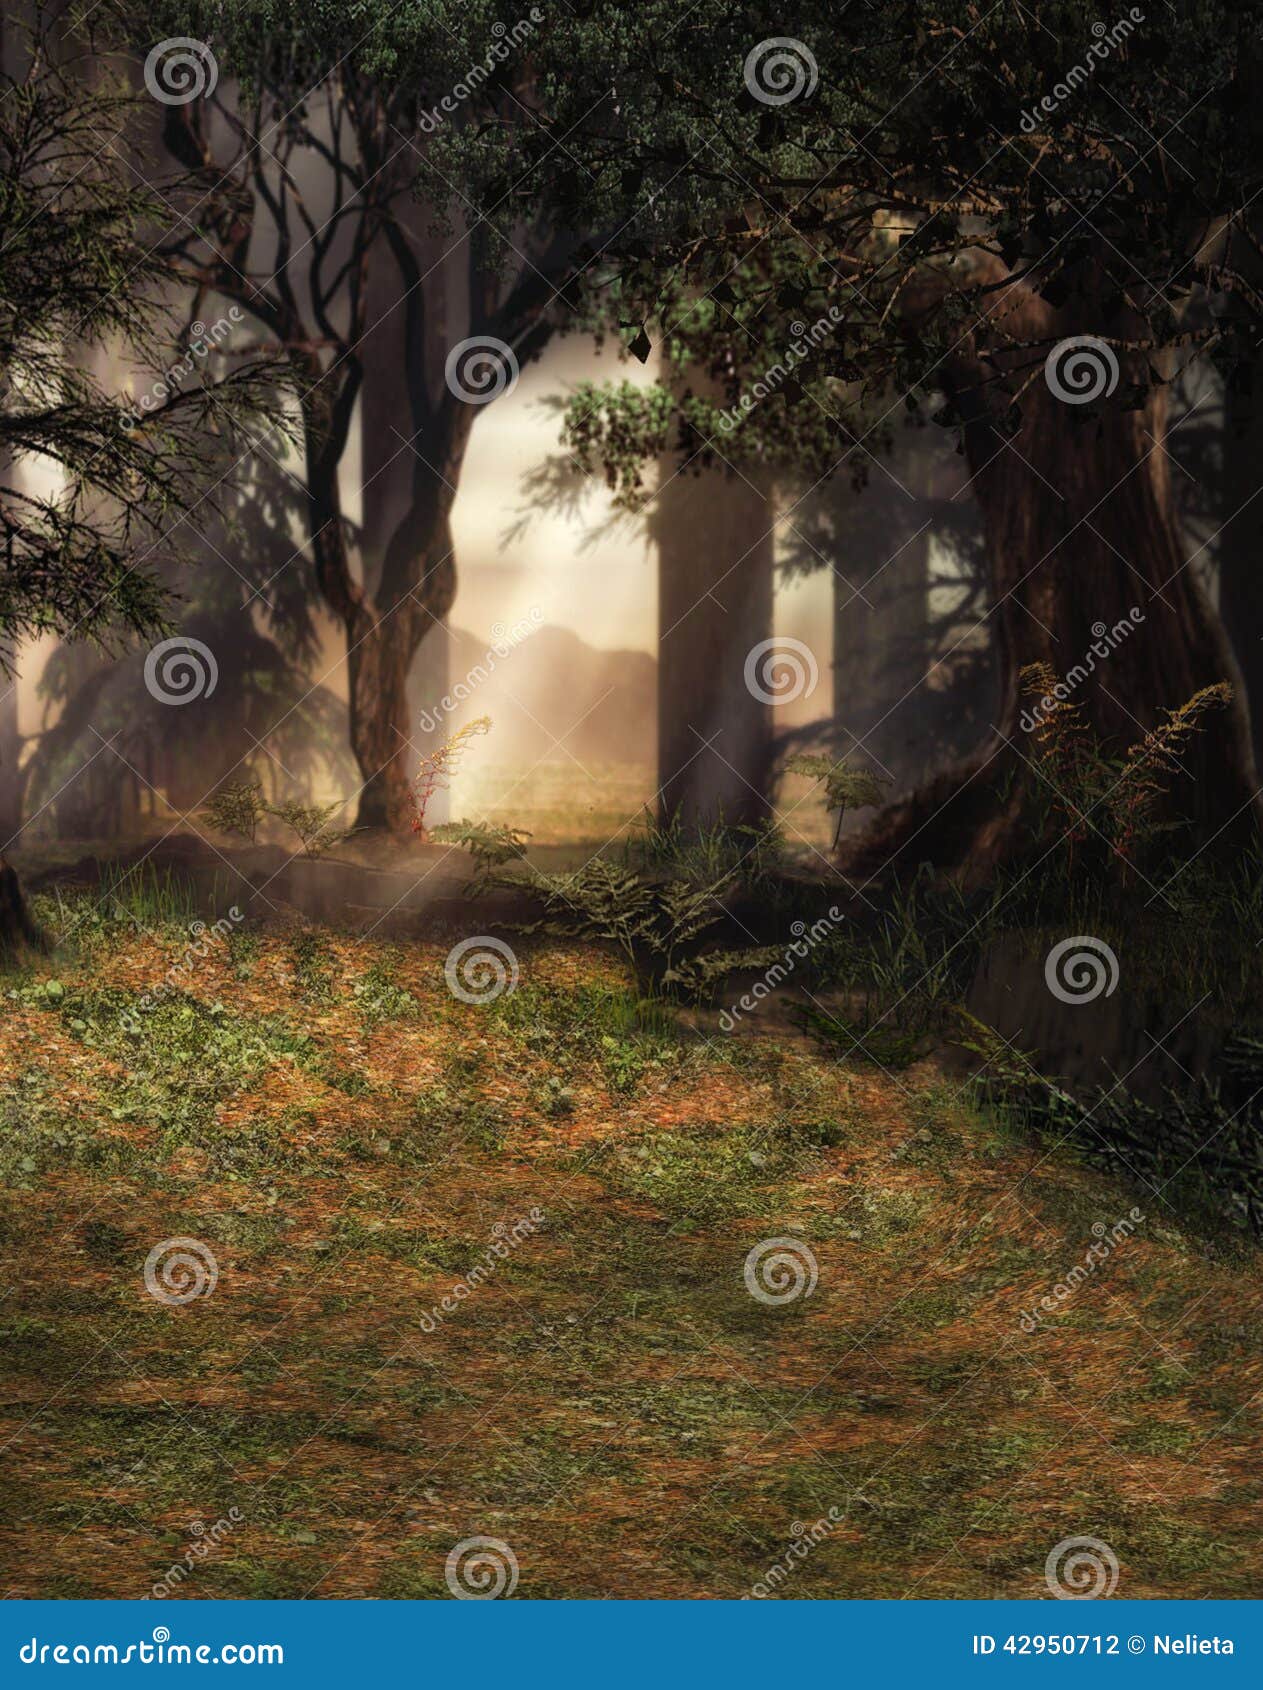 enchanted forest scene